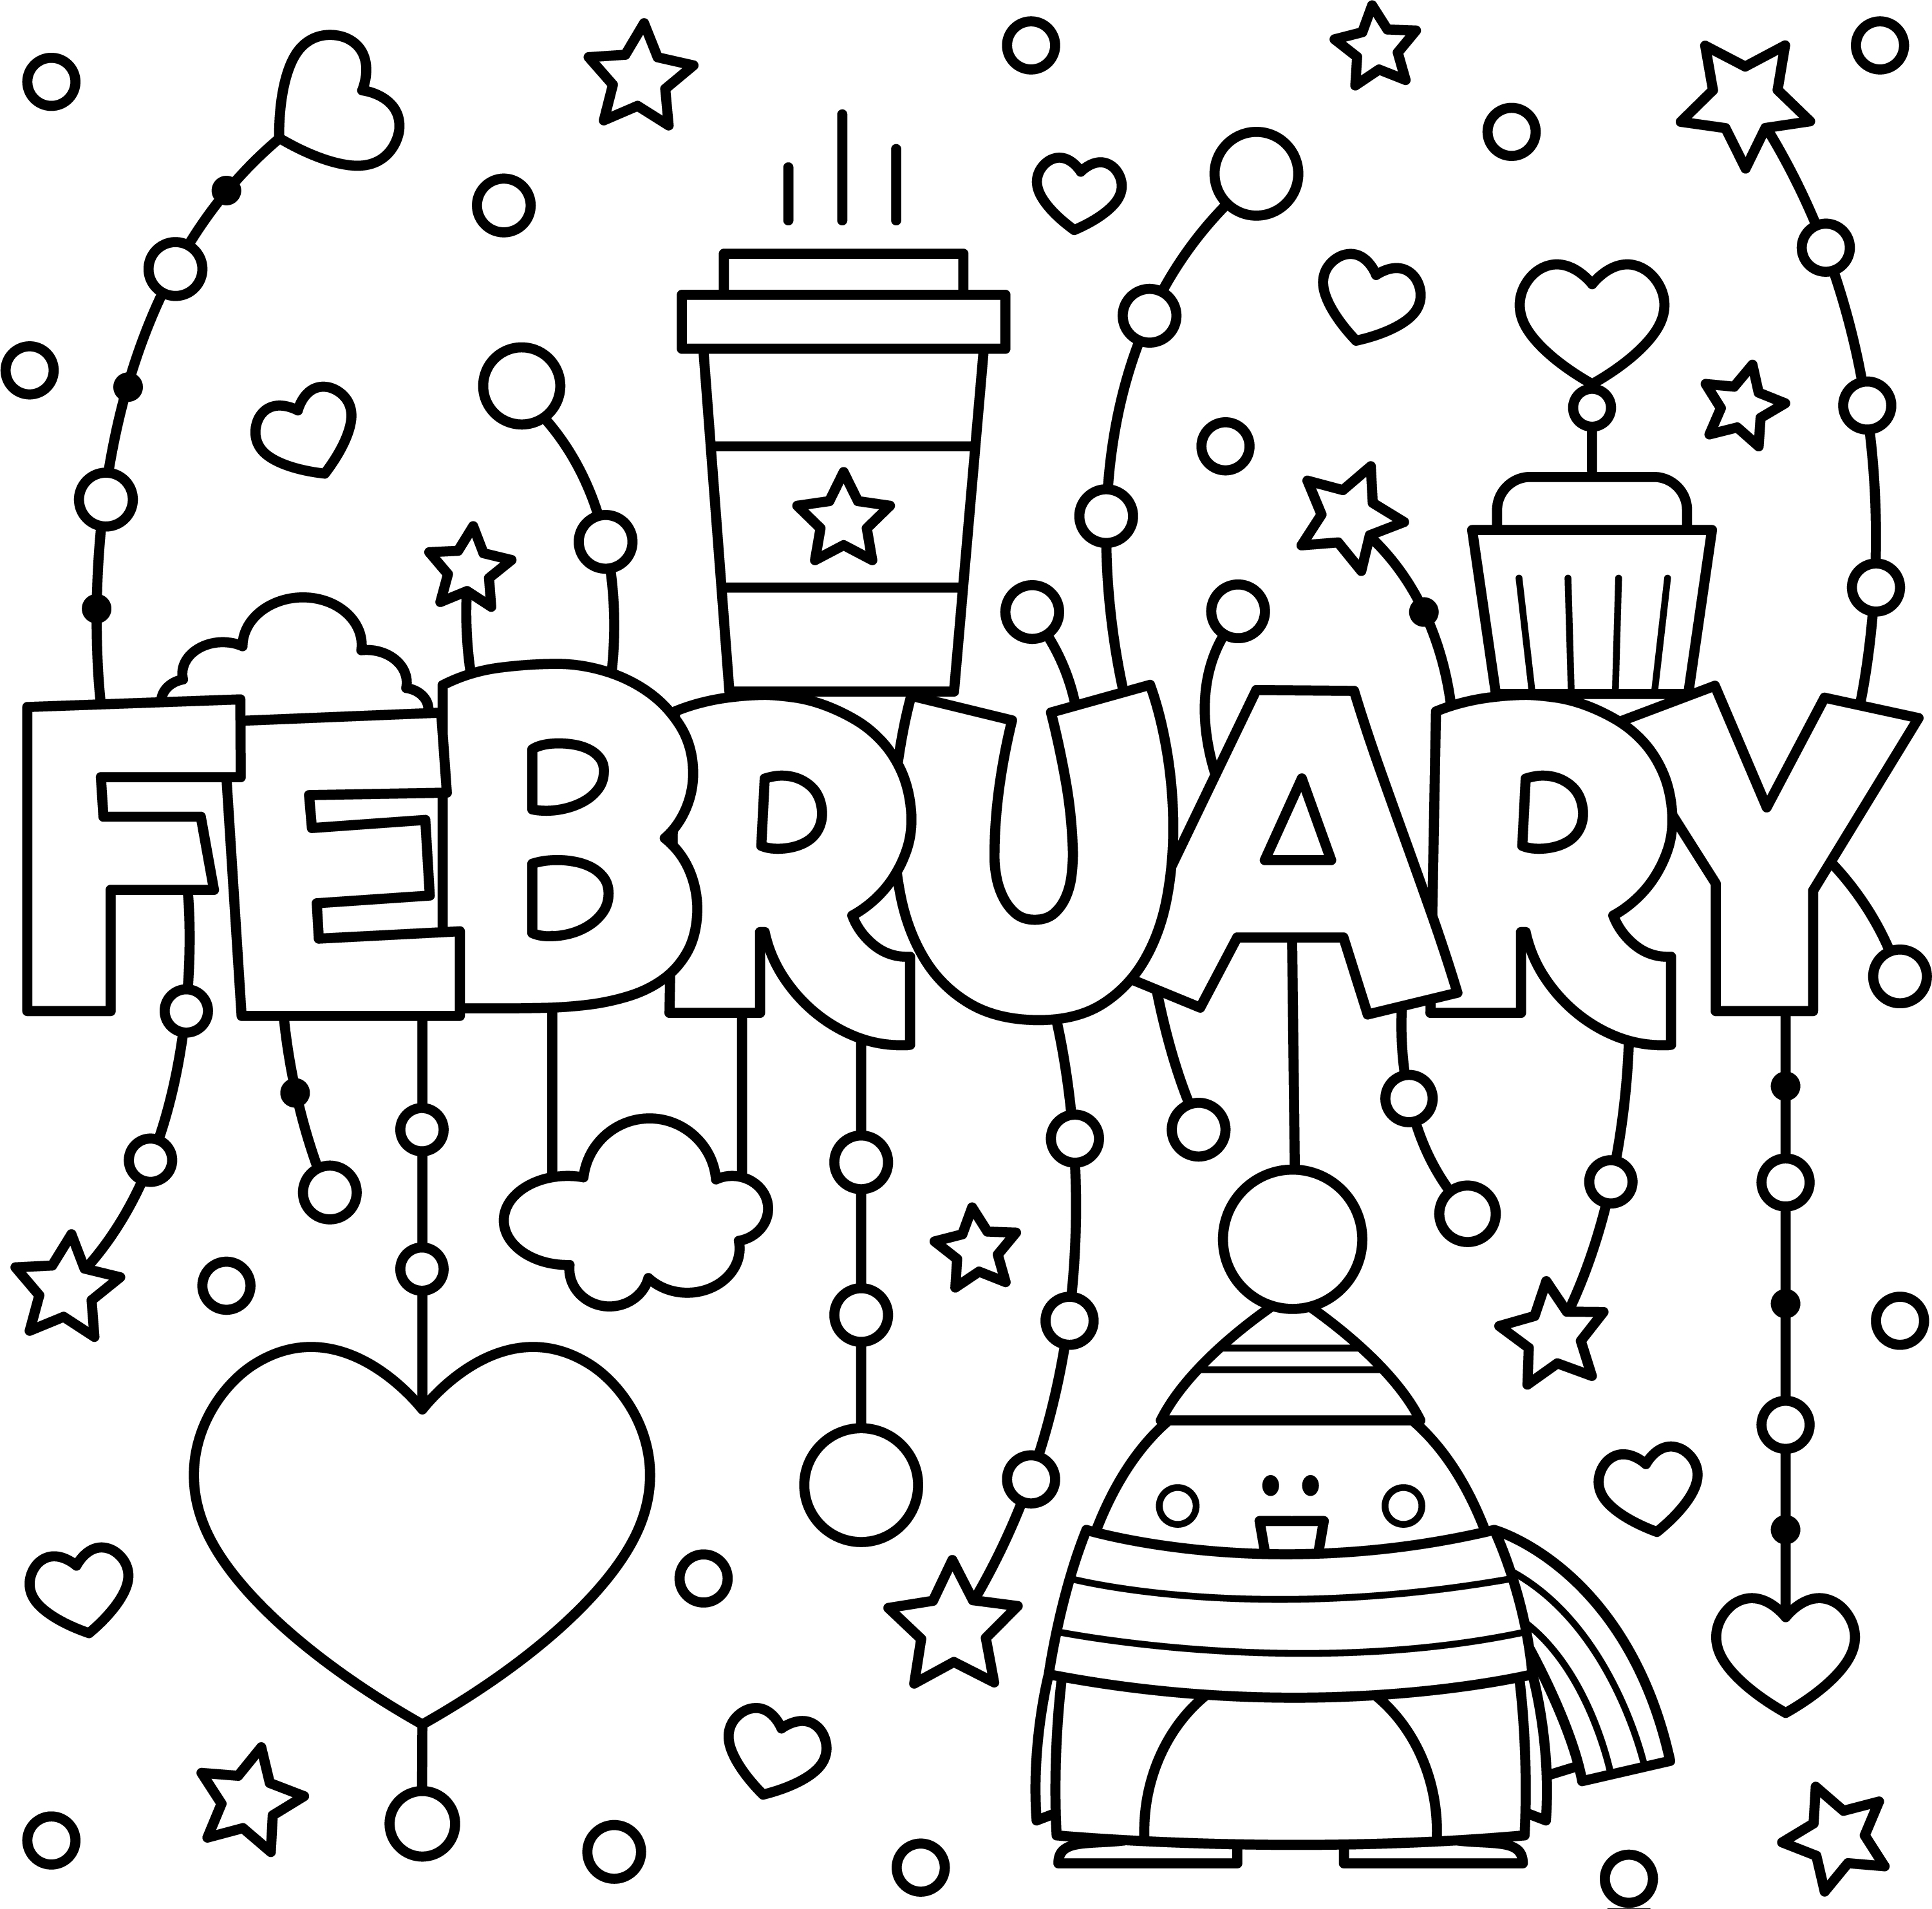 February colouring page â thrifty mommas tips